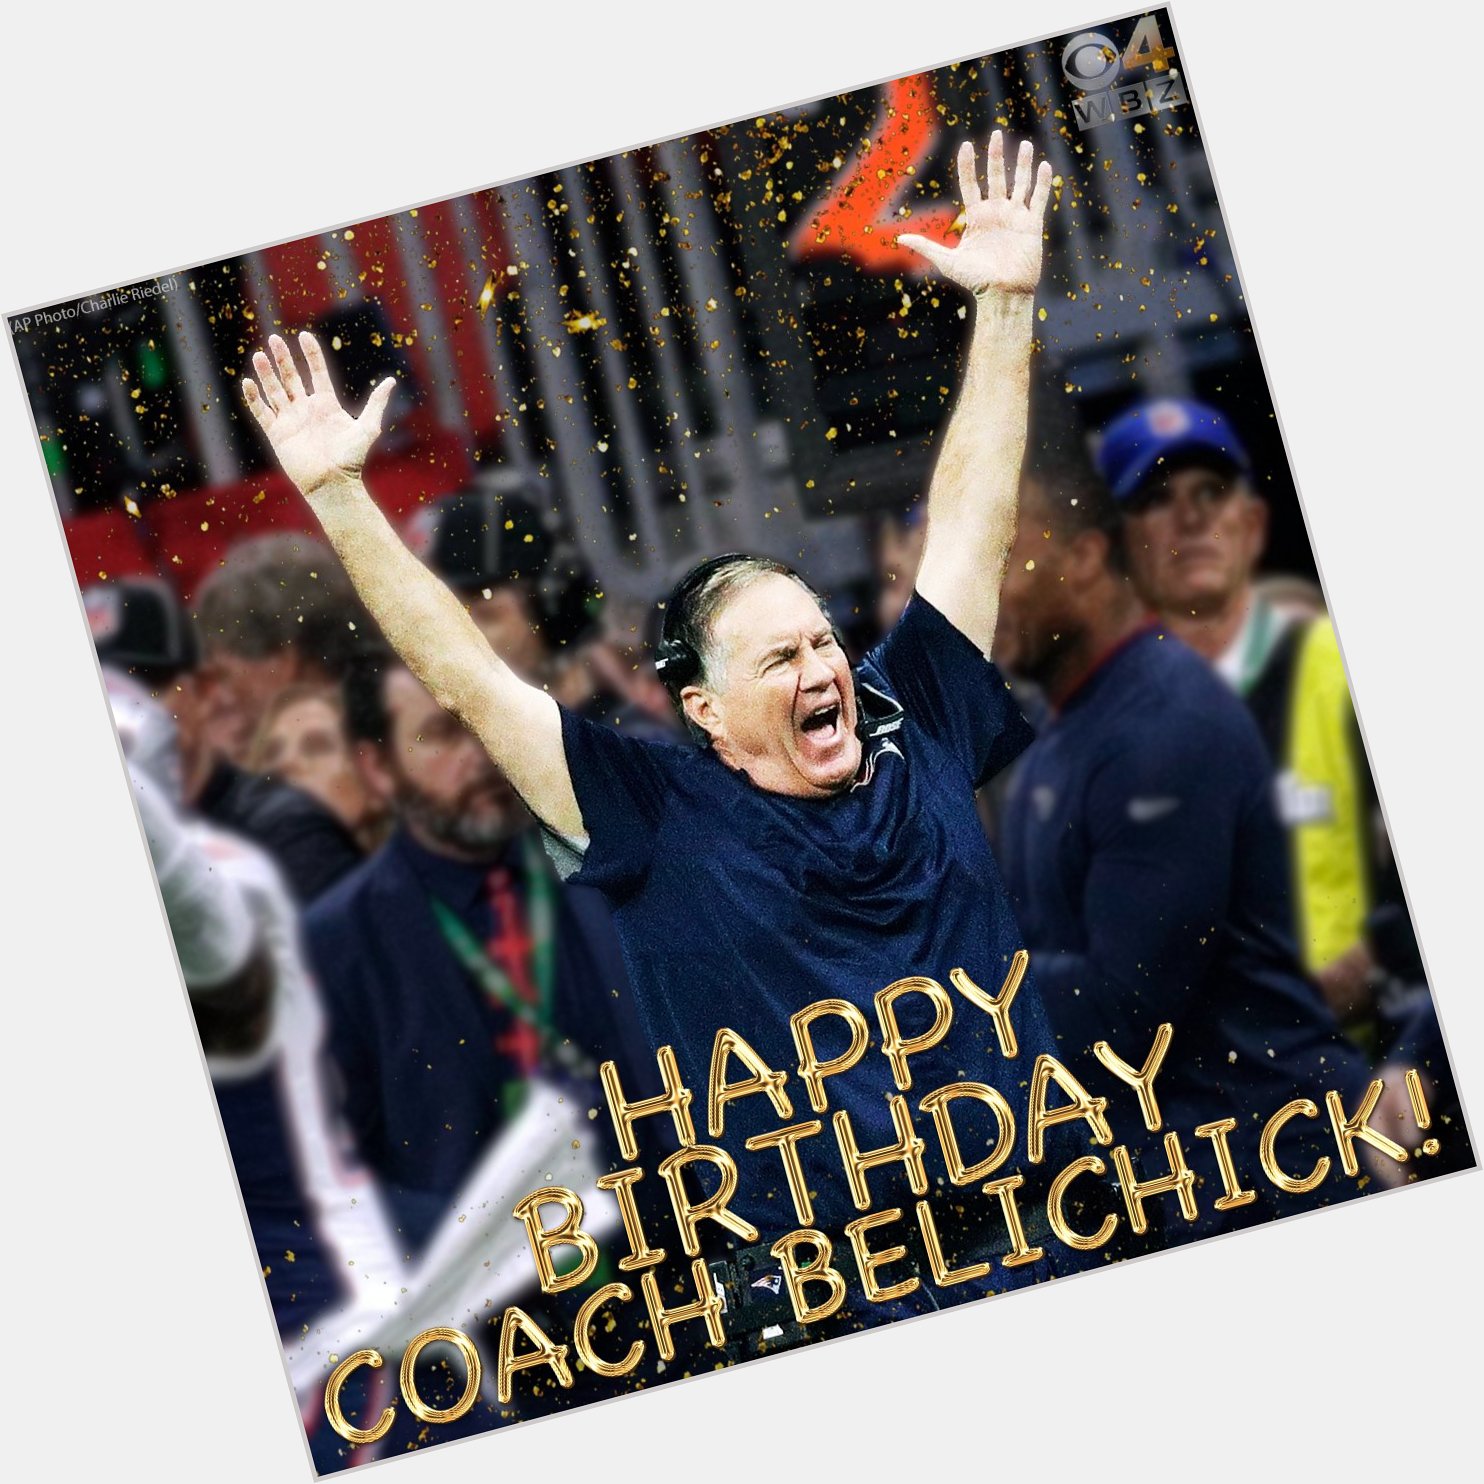 Happy birthday to coach Bill Belichick - 69 years old today! 